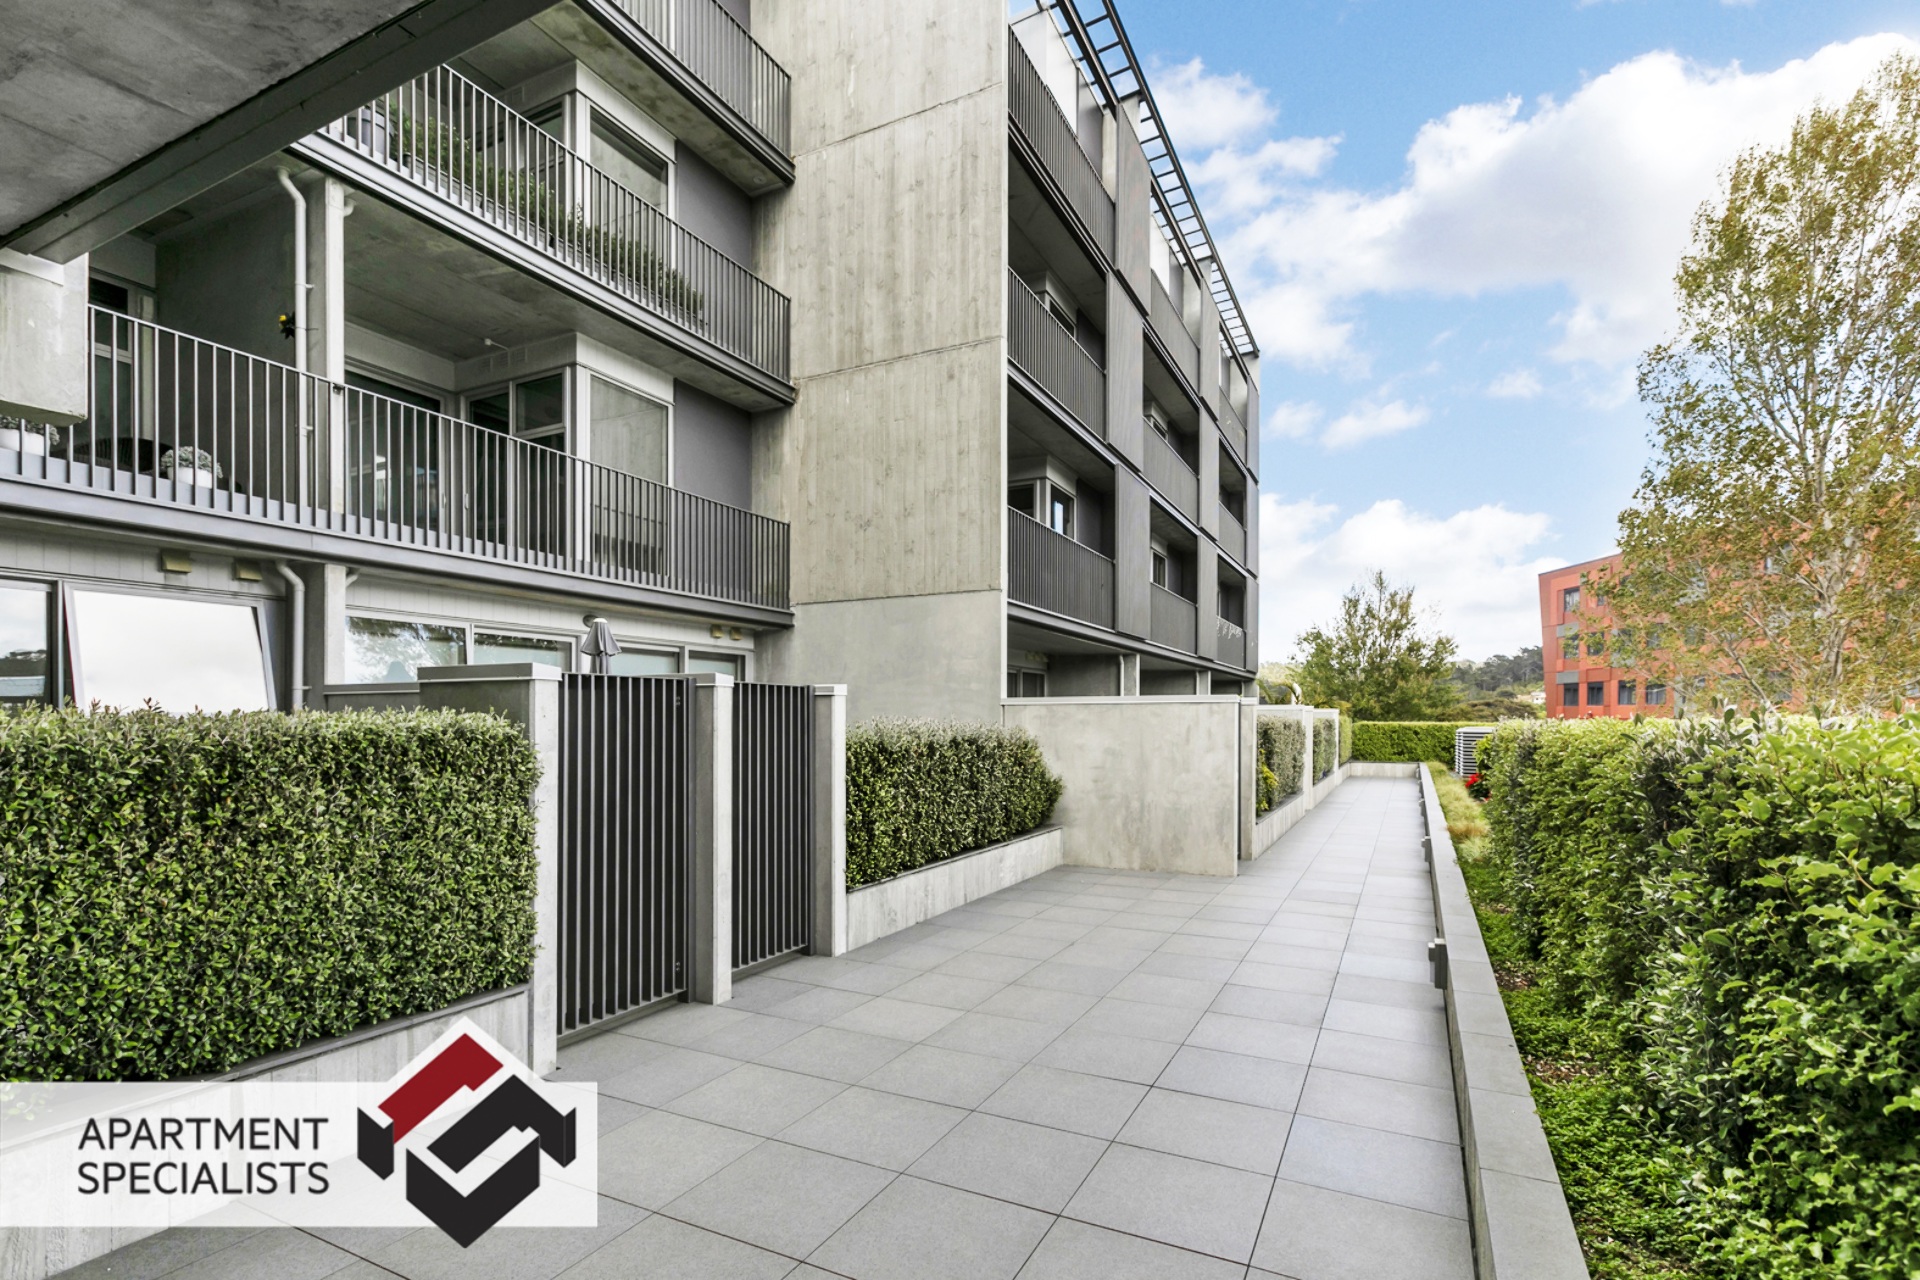 11 | 40 Library Lane, Albany | Apartment Specialists